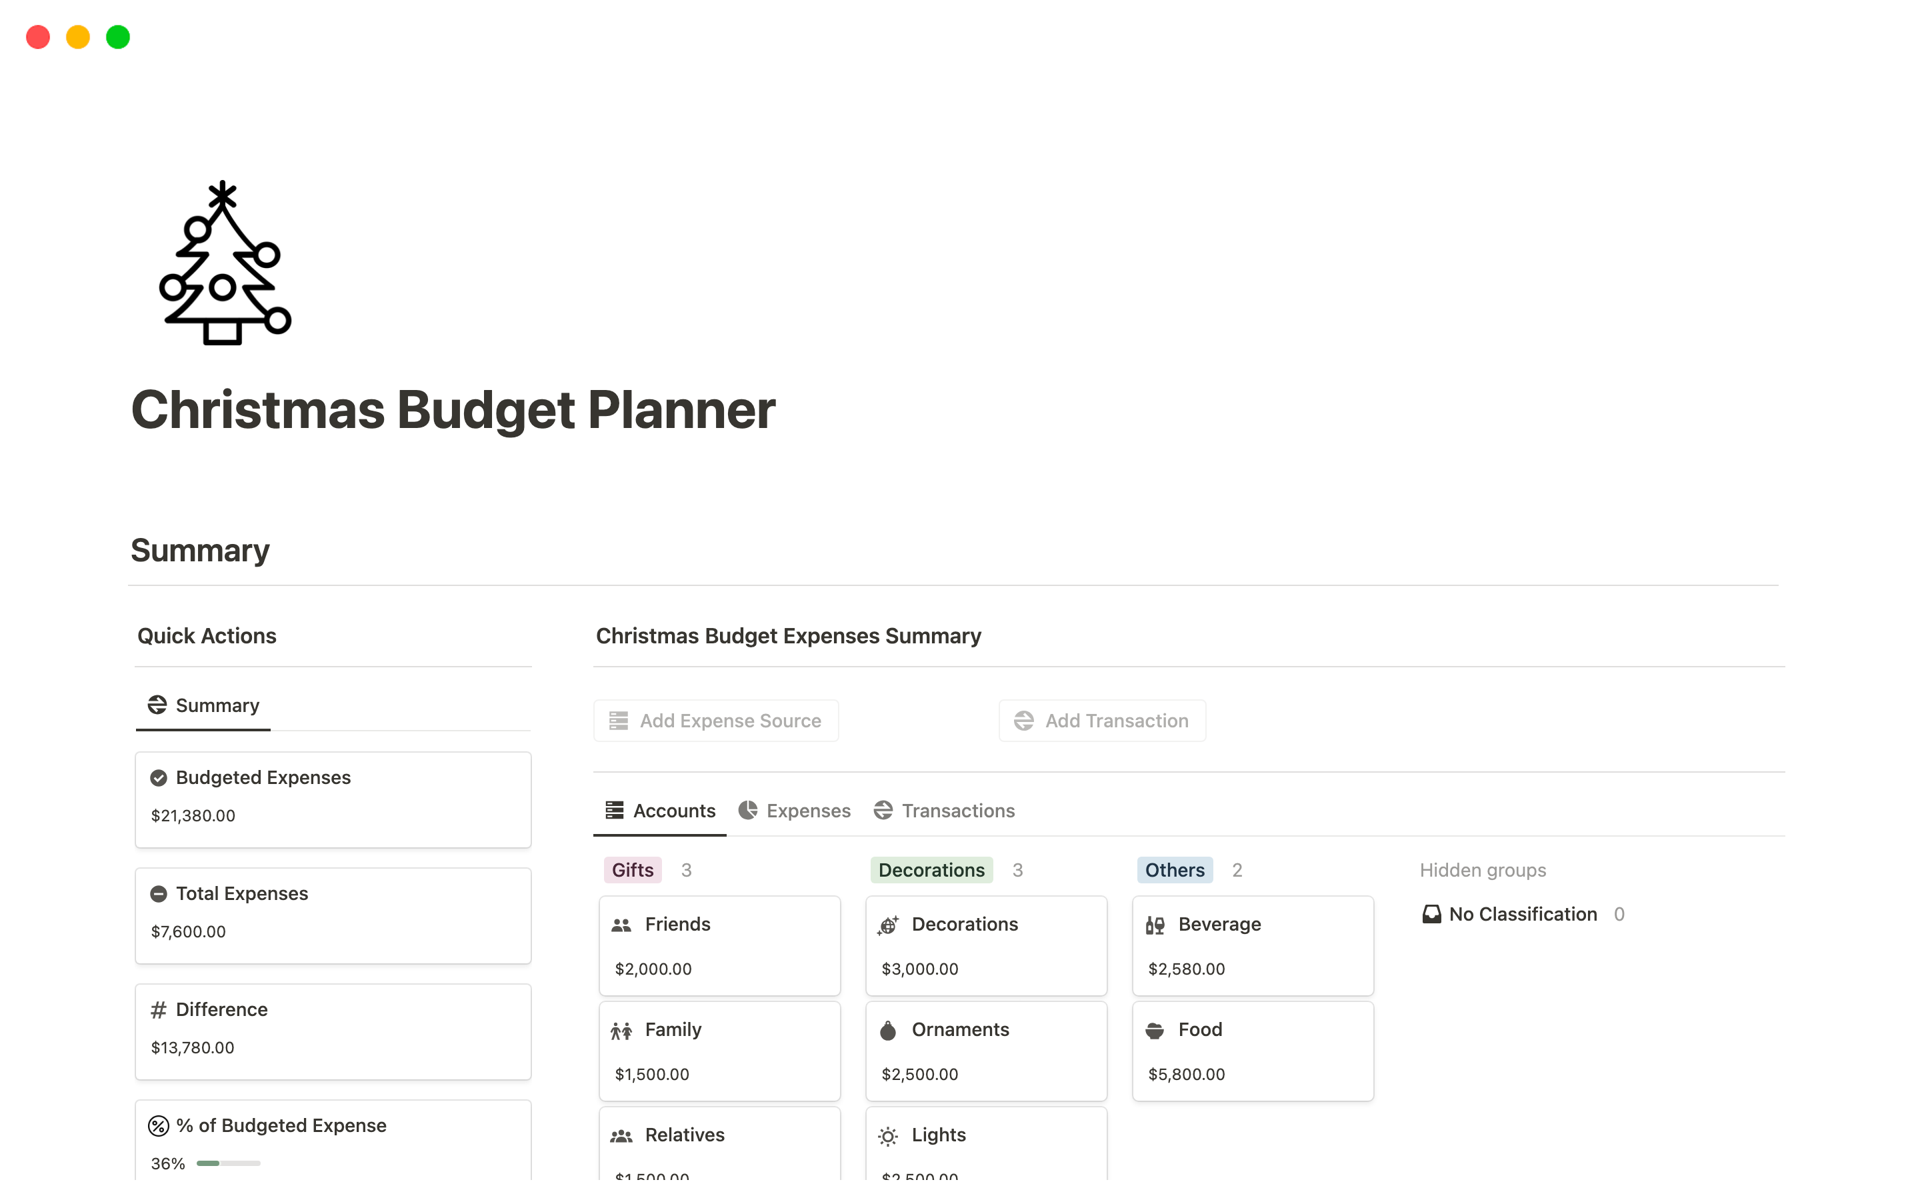 Christmas Budget planner is a financial planning tool designed to help individuals or households track, allocate, and control their spending during the holiday season to prevent overspending and ensure a financially stress-free Christmas.